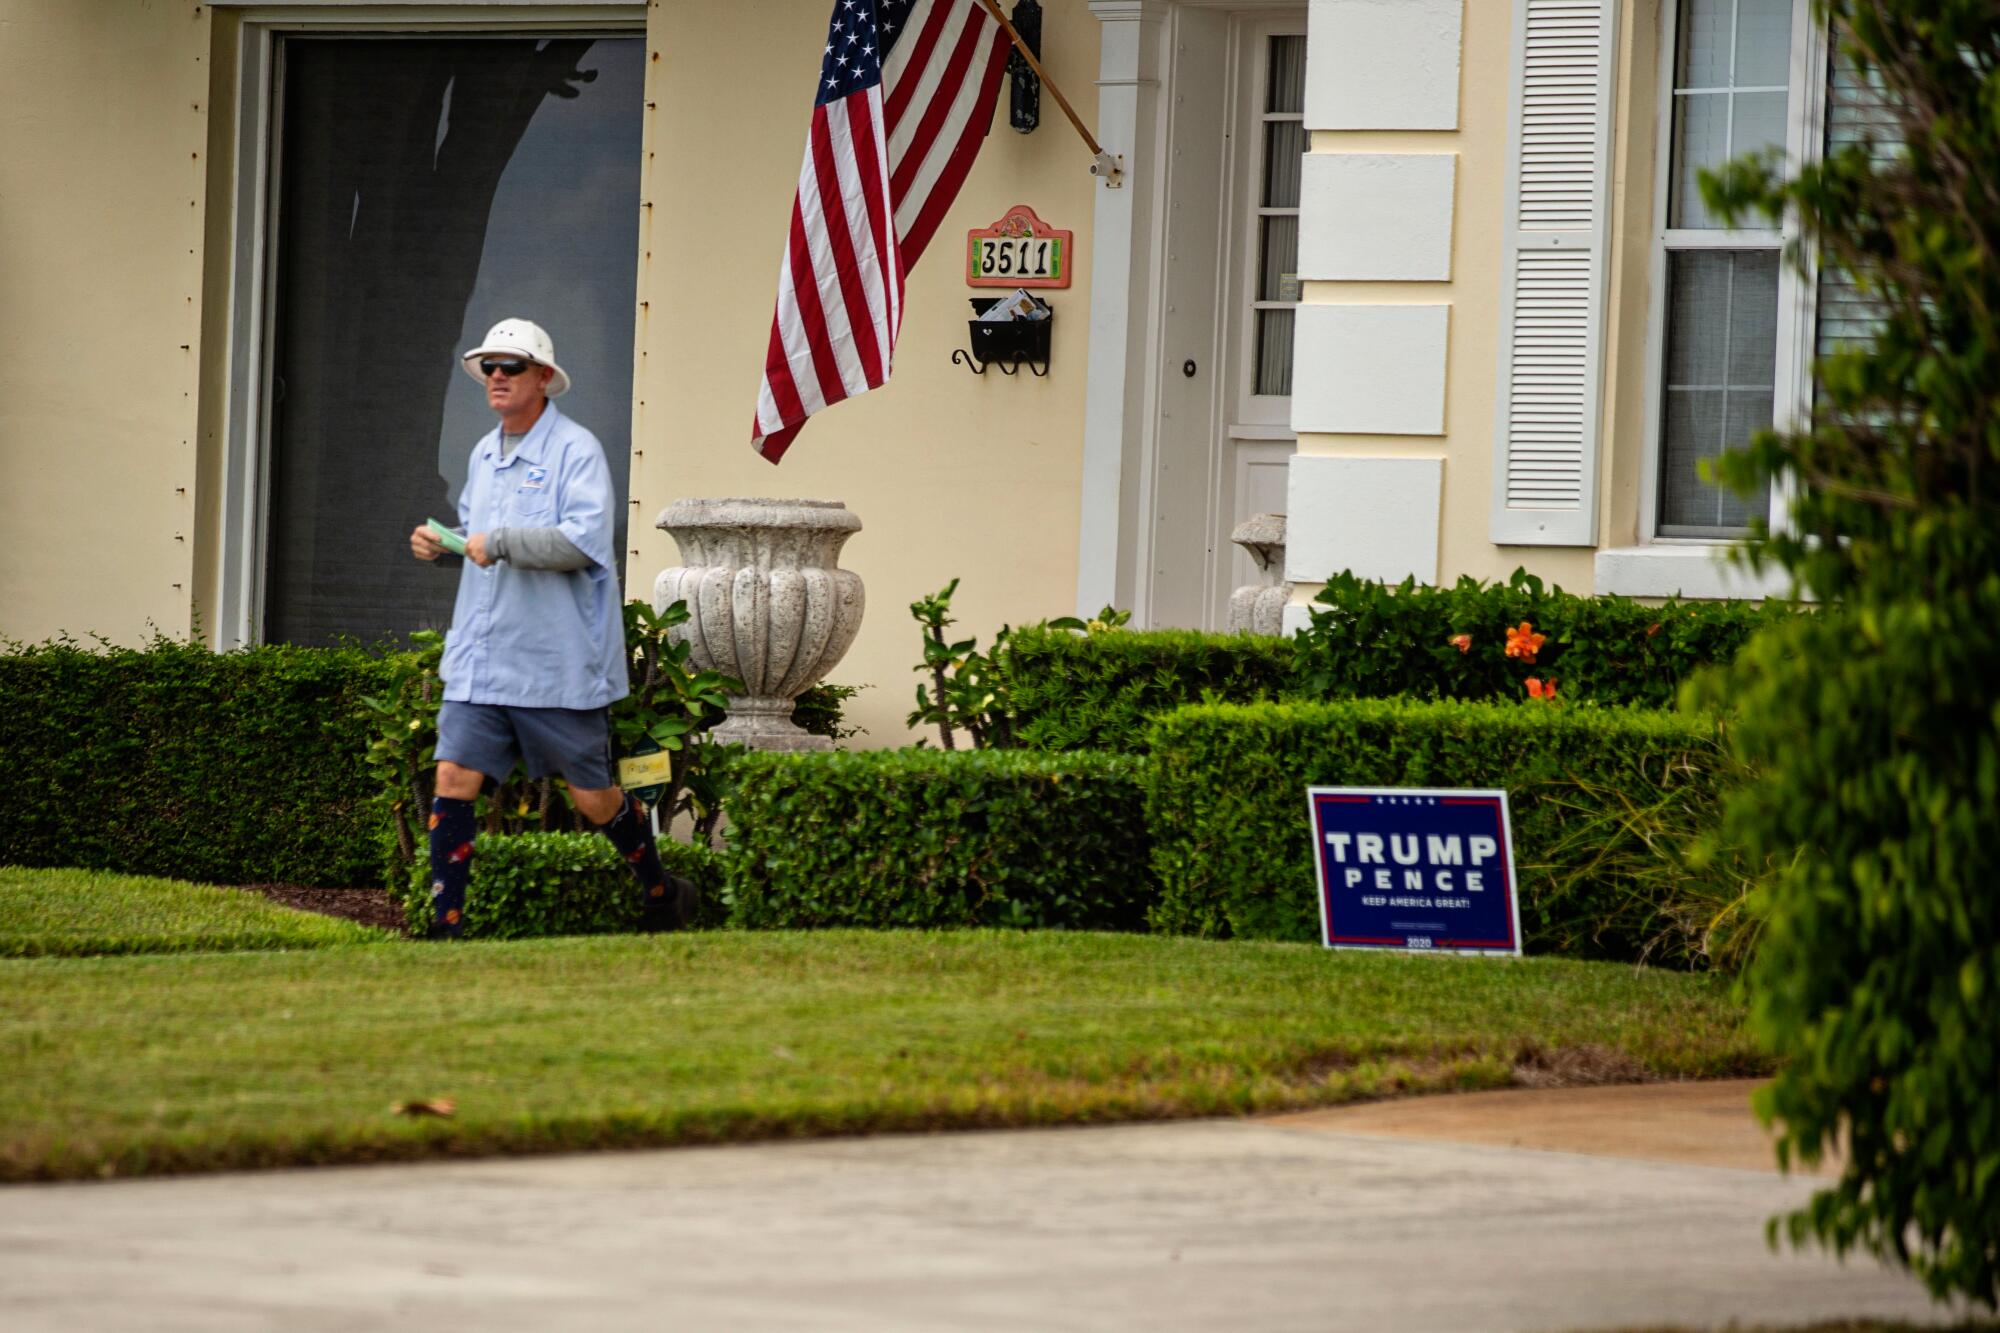 A postman leaves a West Palm Beach home with a yard sign for President Trump in the lawn.